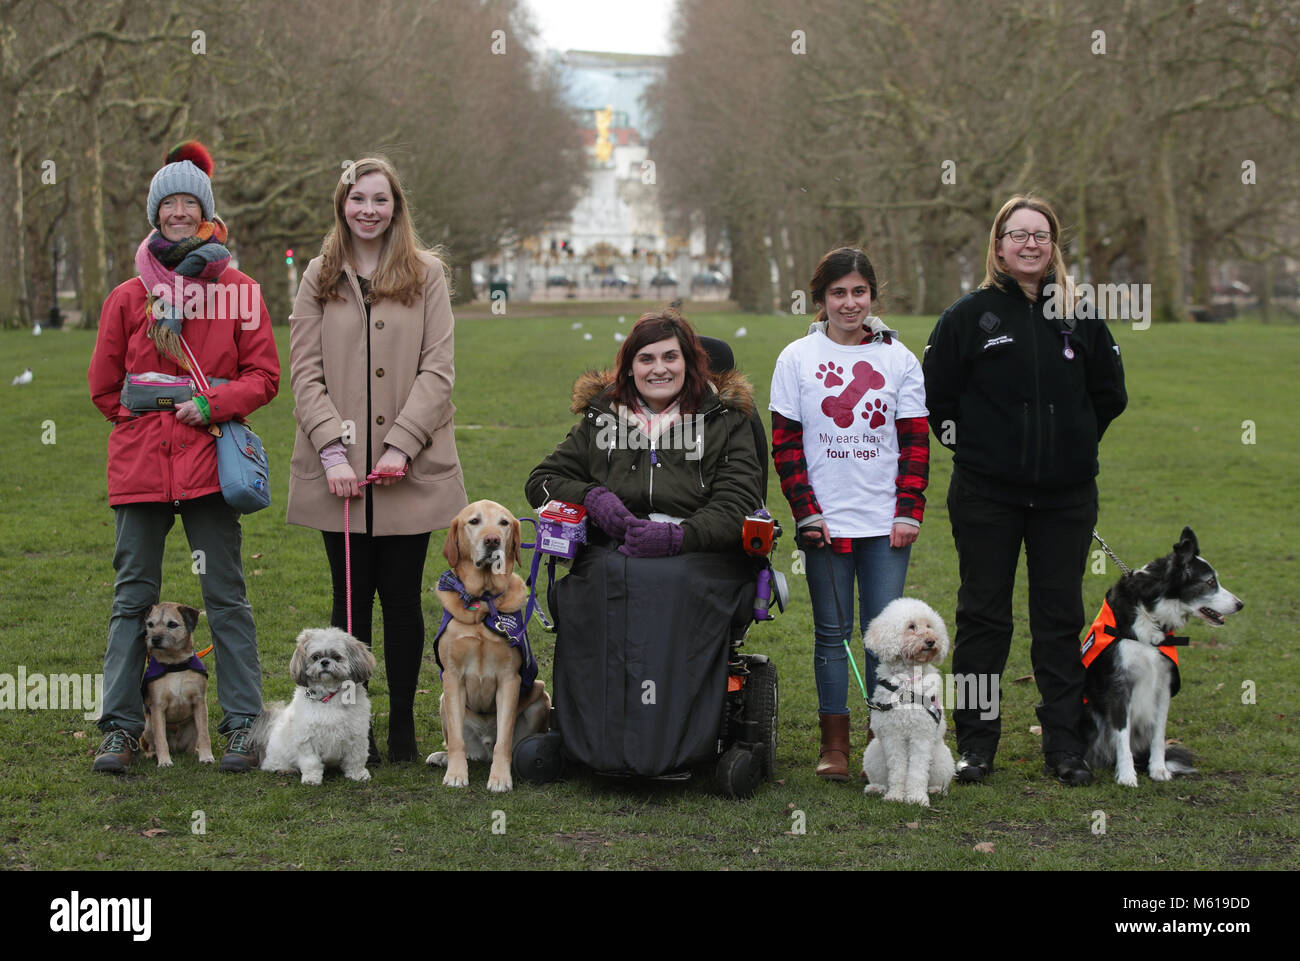 (left to right) Vanessa Holbrow, 47, from Burnham on Sea in Somerset, with her Border Terrier Sir Jack Spratticus; Hannah Gates, 19, from Hazlemere in Buckinghamshire, with her Shih Tzu Buttons; Clare Syvertsen, 29, from Notholt in London, with her Labrador/Golden Retriever cross Griffin; Sarah Mohammadi, 14, from Hayes in west London, with her Cocker Spaniel/Poodle cross Waffle, and Gayle Wilde, 39, from Kilsyth in Lanarkshire, with her Border Collie Taz, during a photocall by The Kennel Club in Green Park, London, to announce the finalists for the Crufts dog hero competition, Friends for Lif Stock Photo